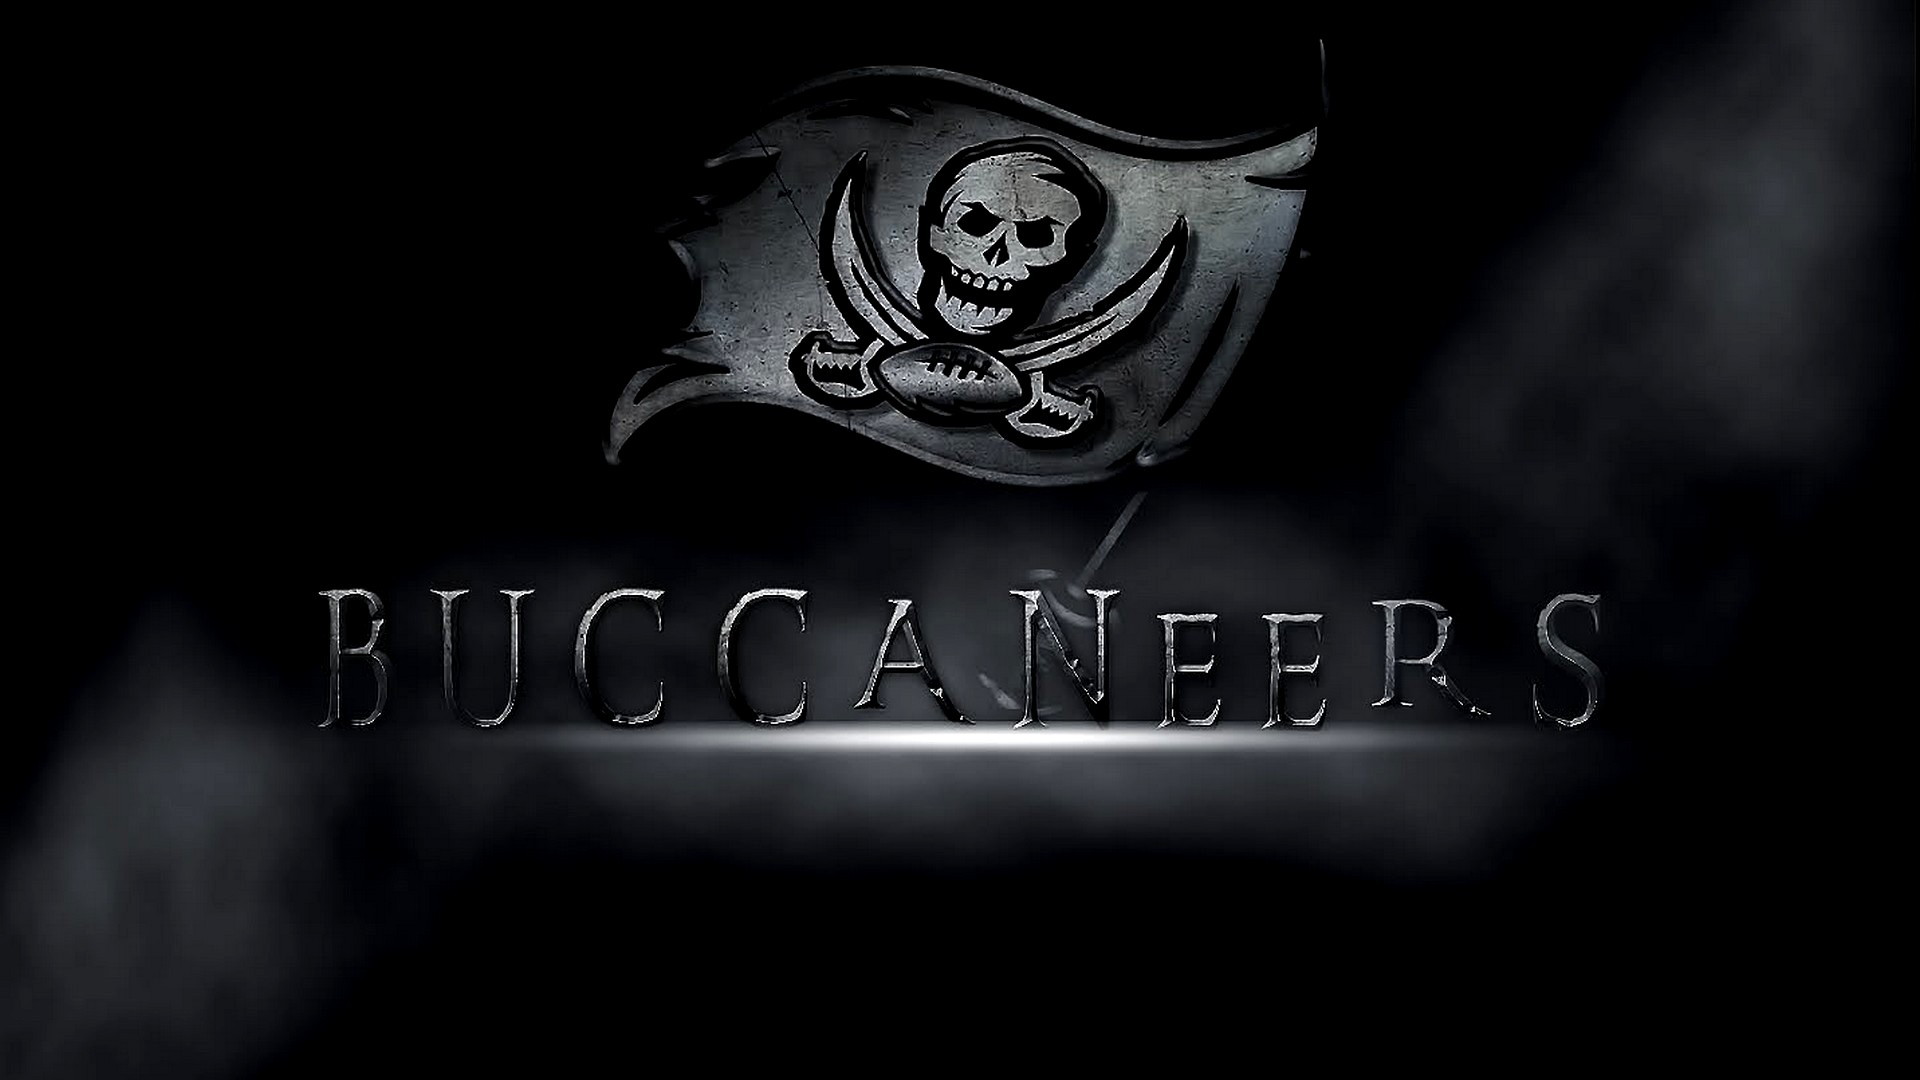 Tampa Bay Buccaneers Wallpapers in HD with high-resolution 1920x1080 pixel. You can use and set as wallpaper for Notebook Screensavers, Mac Wallpapers, Mobile Home Screen, iPhone or Android Phones Lock Screen